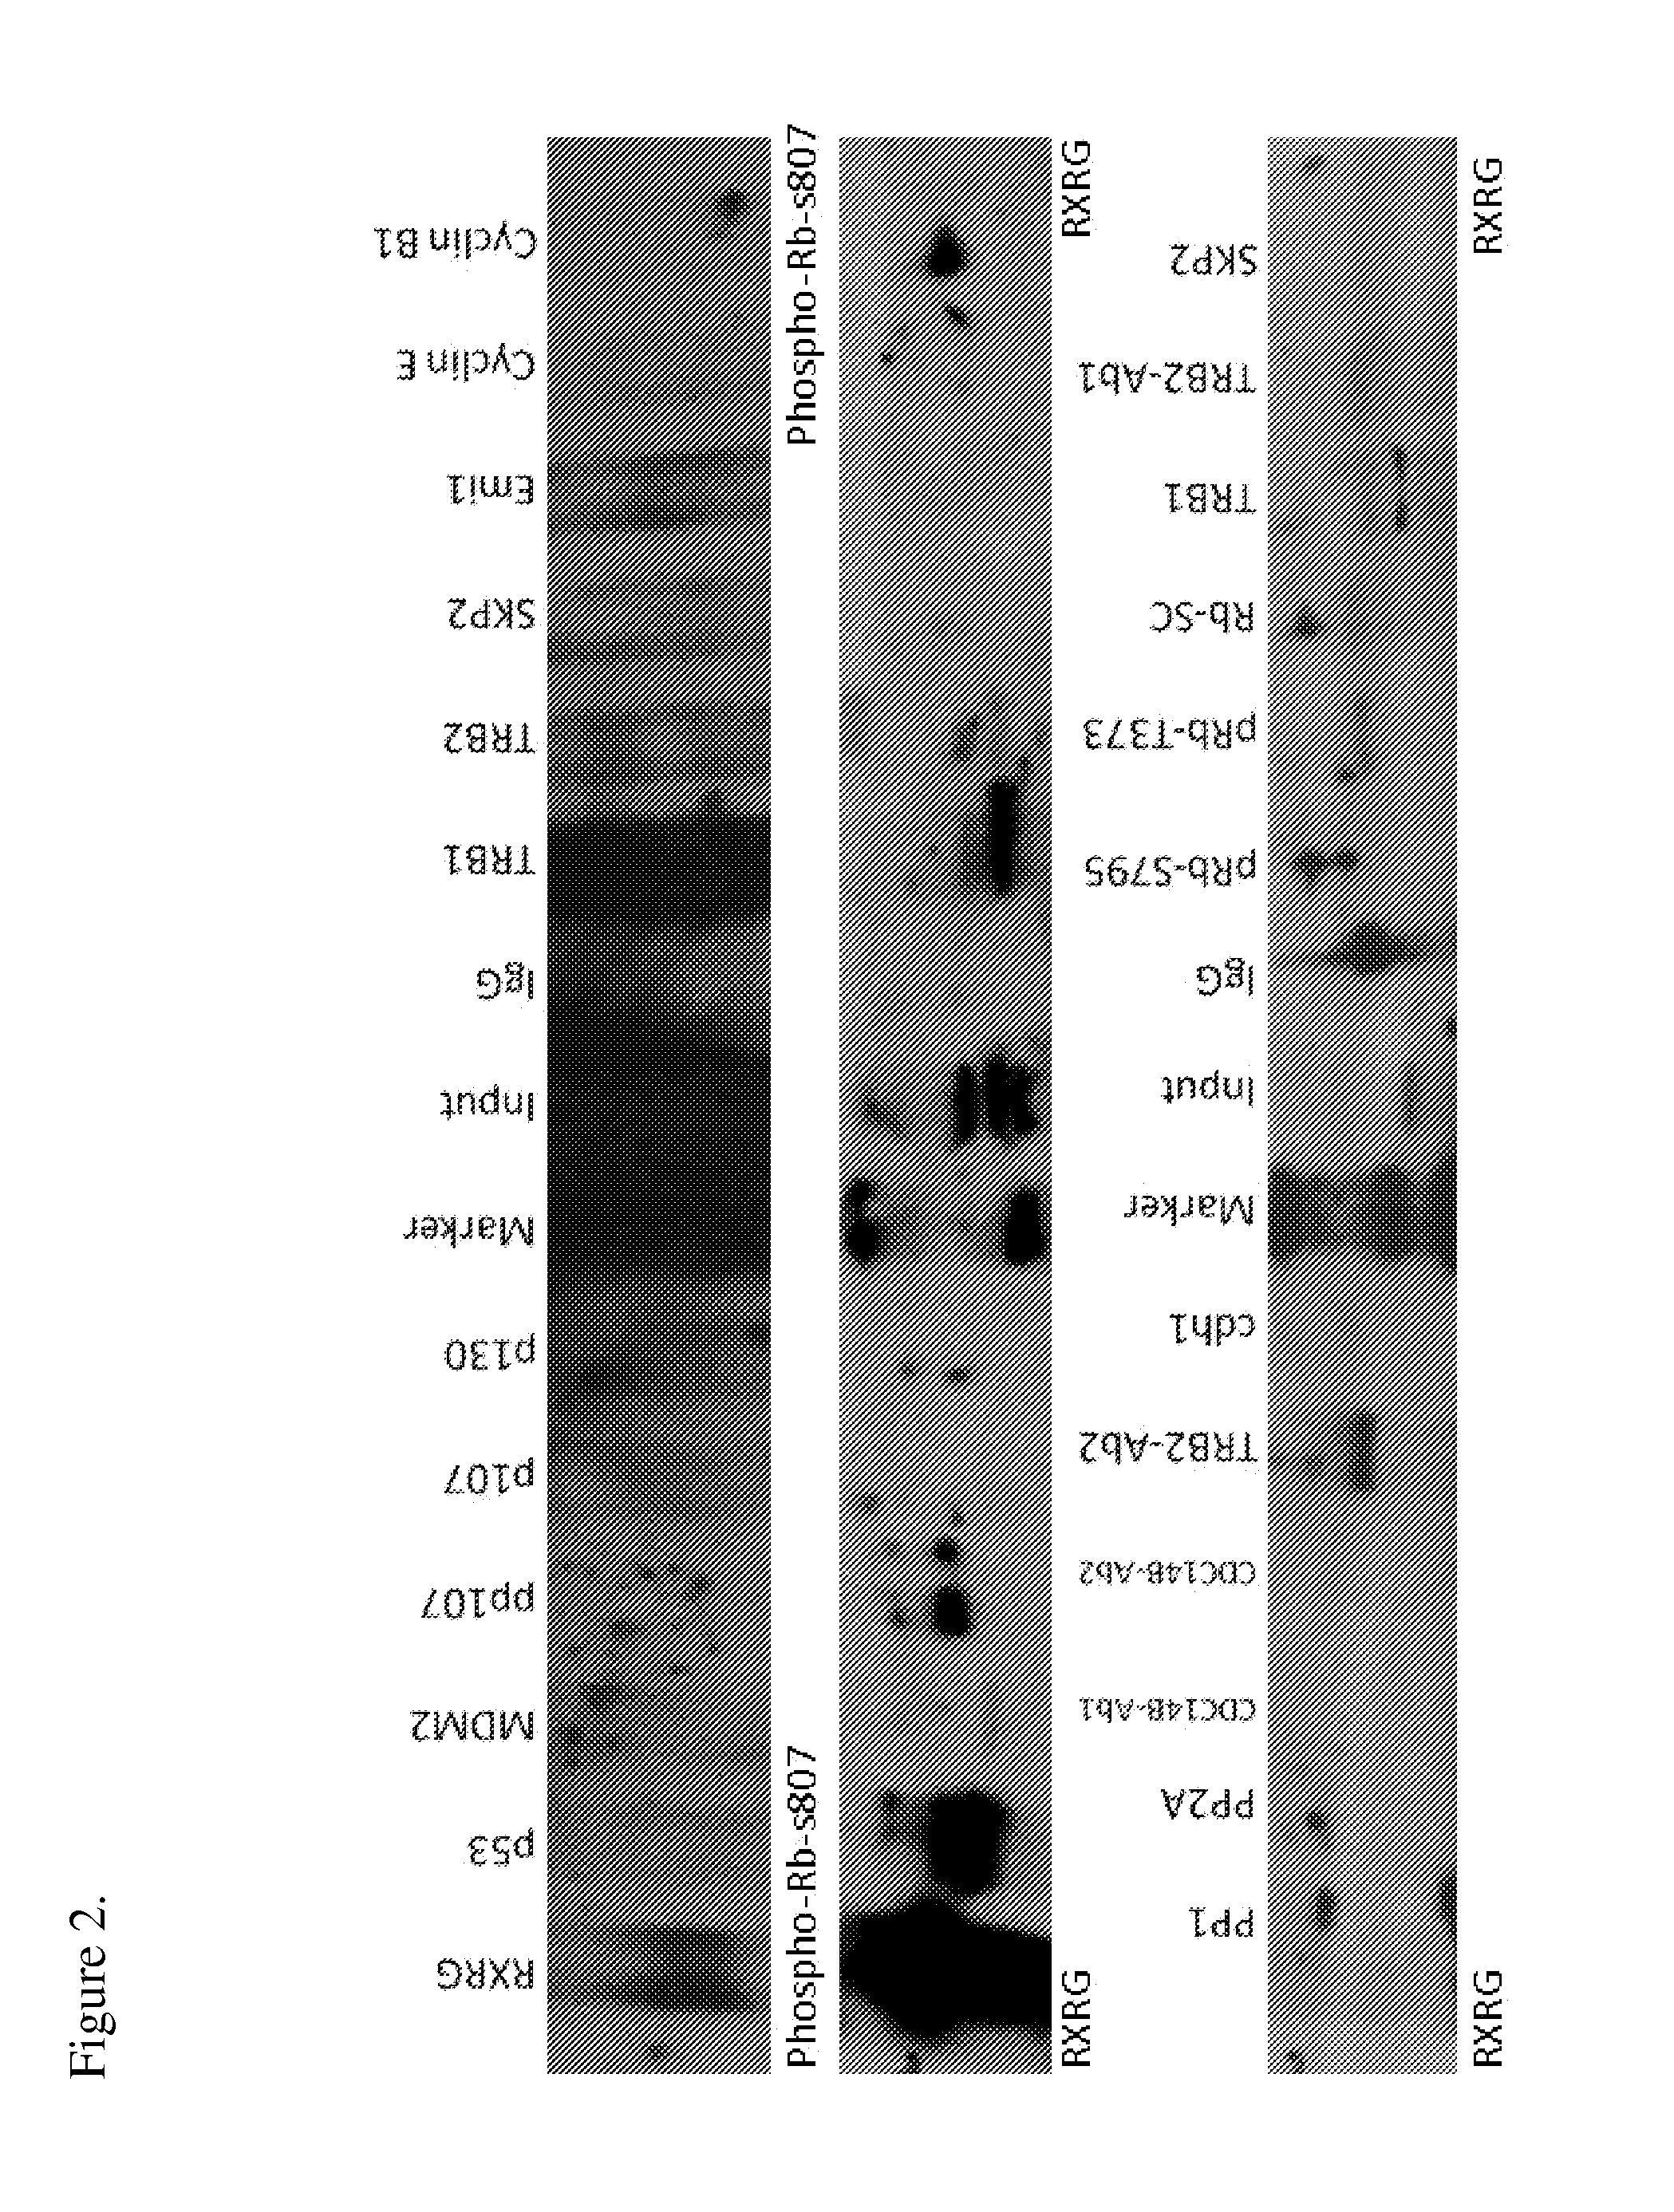 Rxrg modulators for the treatment of cancer